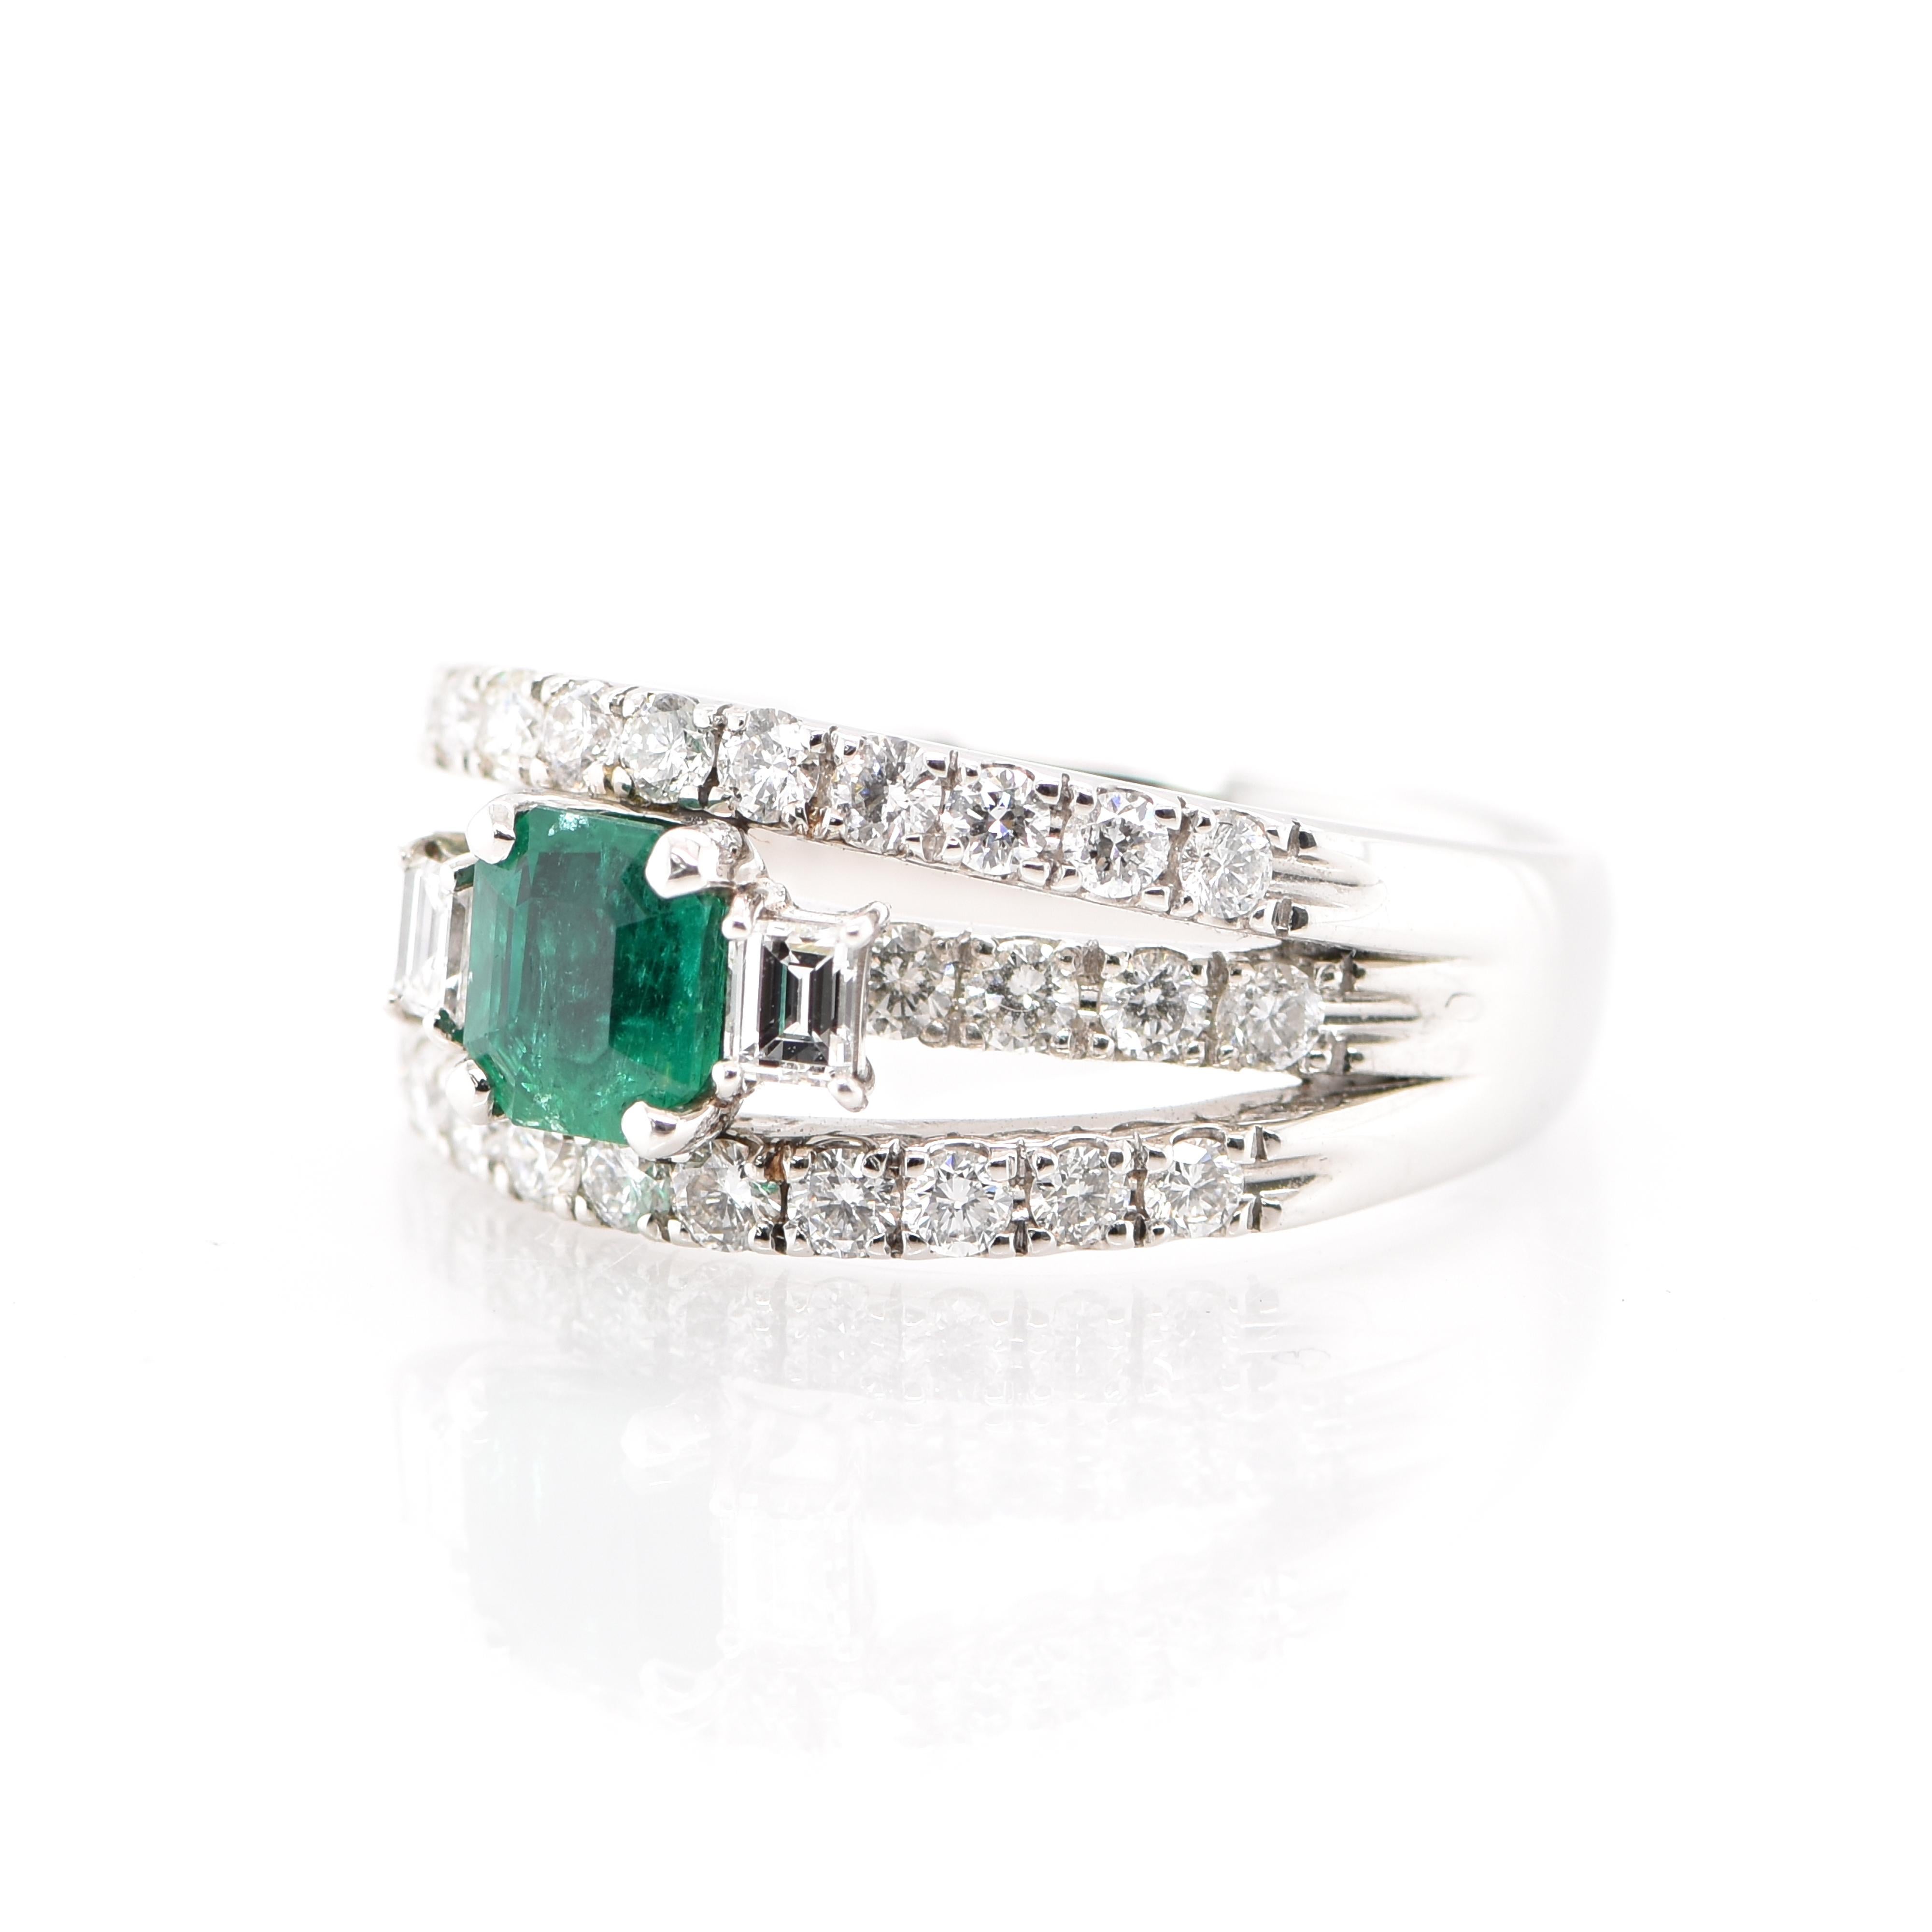 A stunning Engagement/Cocktail Ring featuring a 0.89 Carat Natural Emerald and 1.22 Carats of Diamond Accents set in Platinum. People have admired emerald’s green for thousands of years. Emeralds have always been associated with the lushest